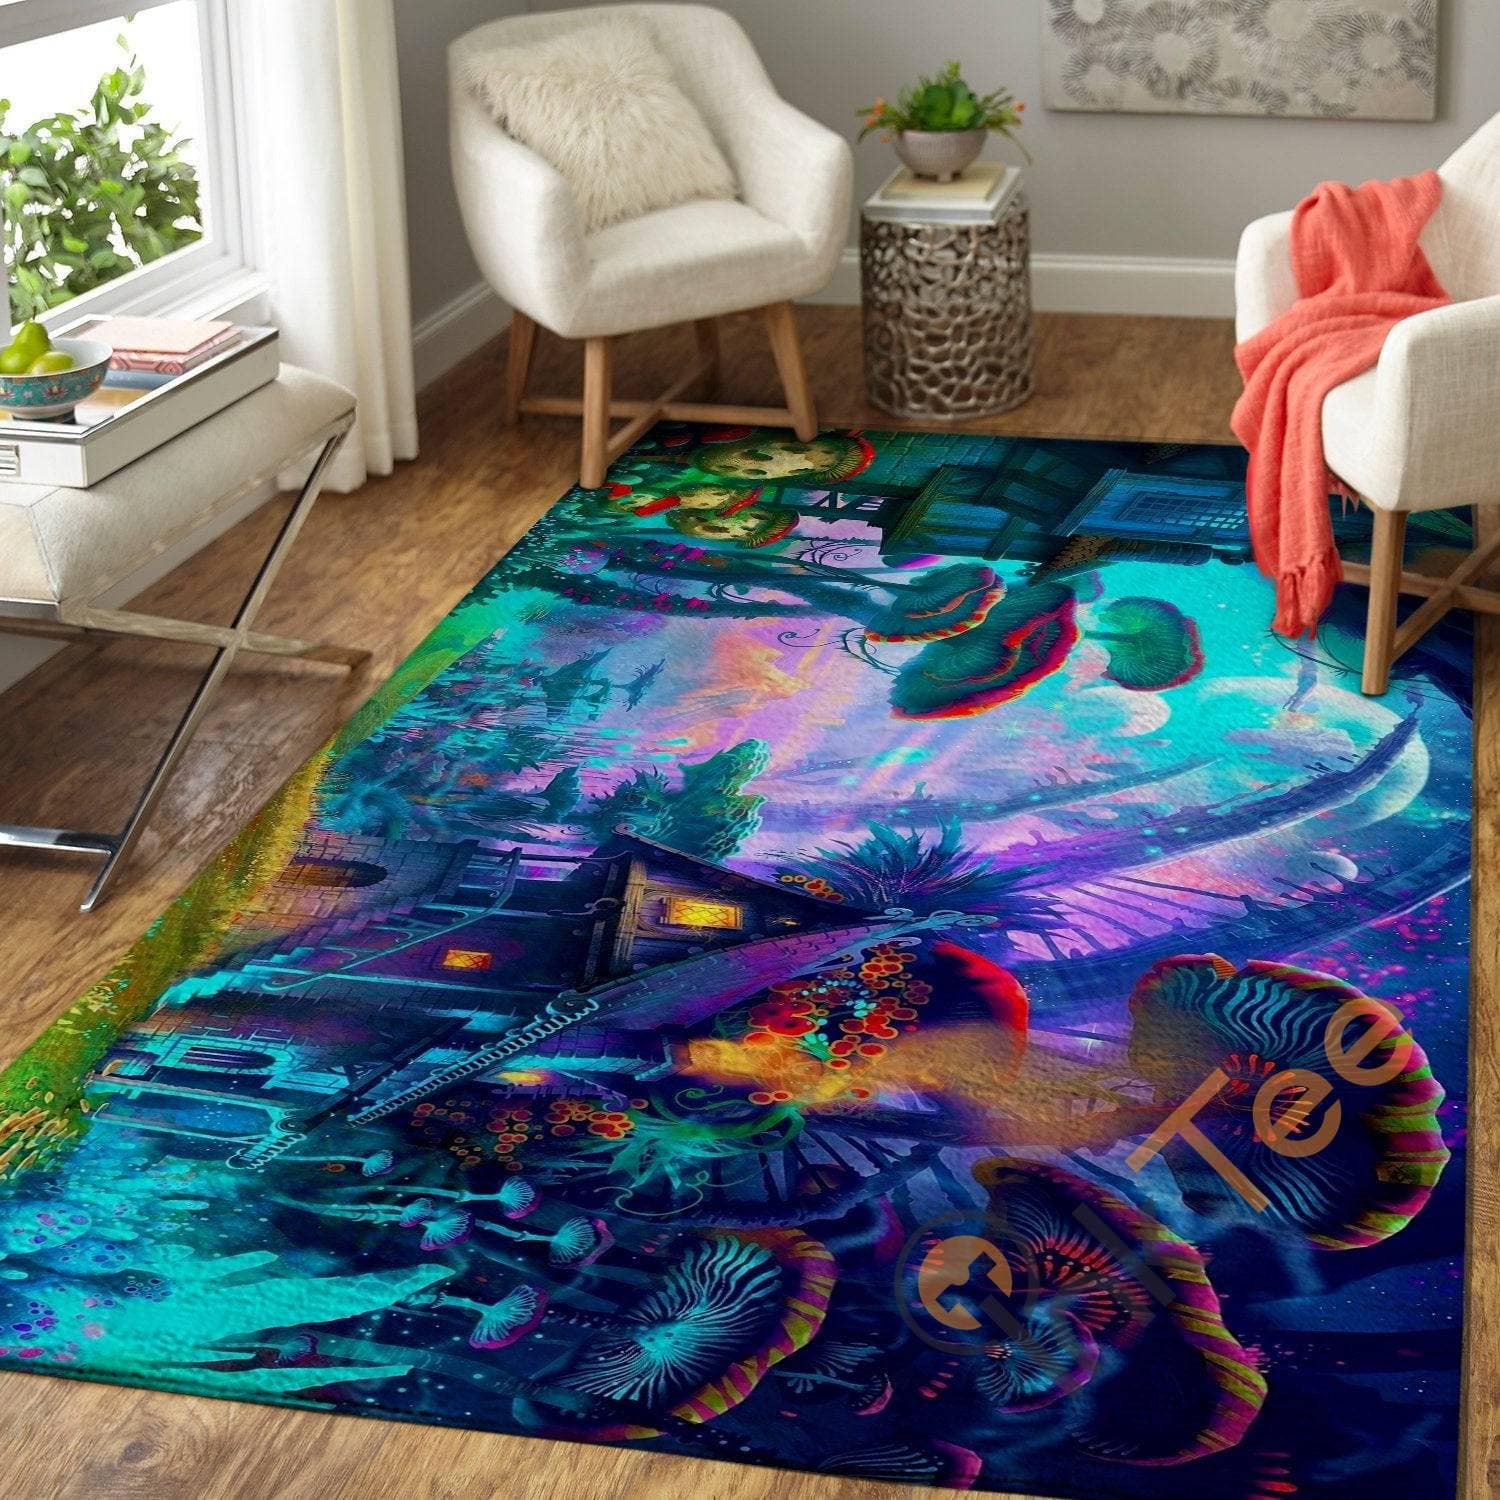 Mysterious And Wonderful Hippie Soft Livingroom Carpet Highlight For Home Gift Her Beautiful Rug